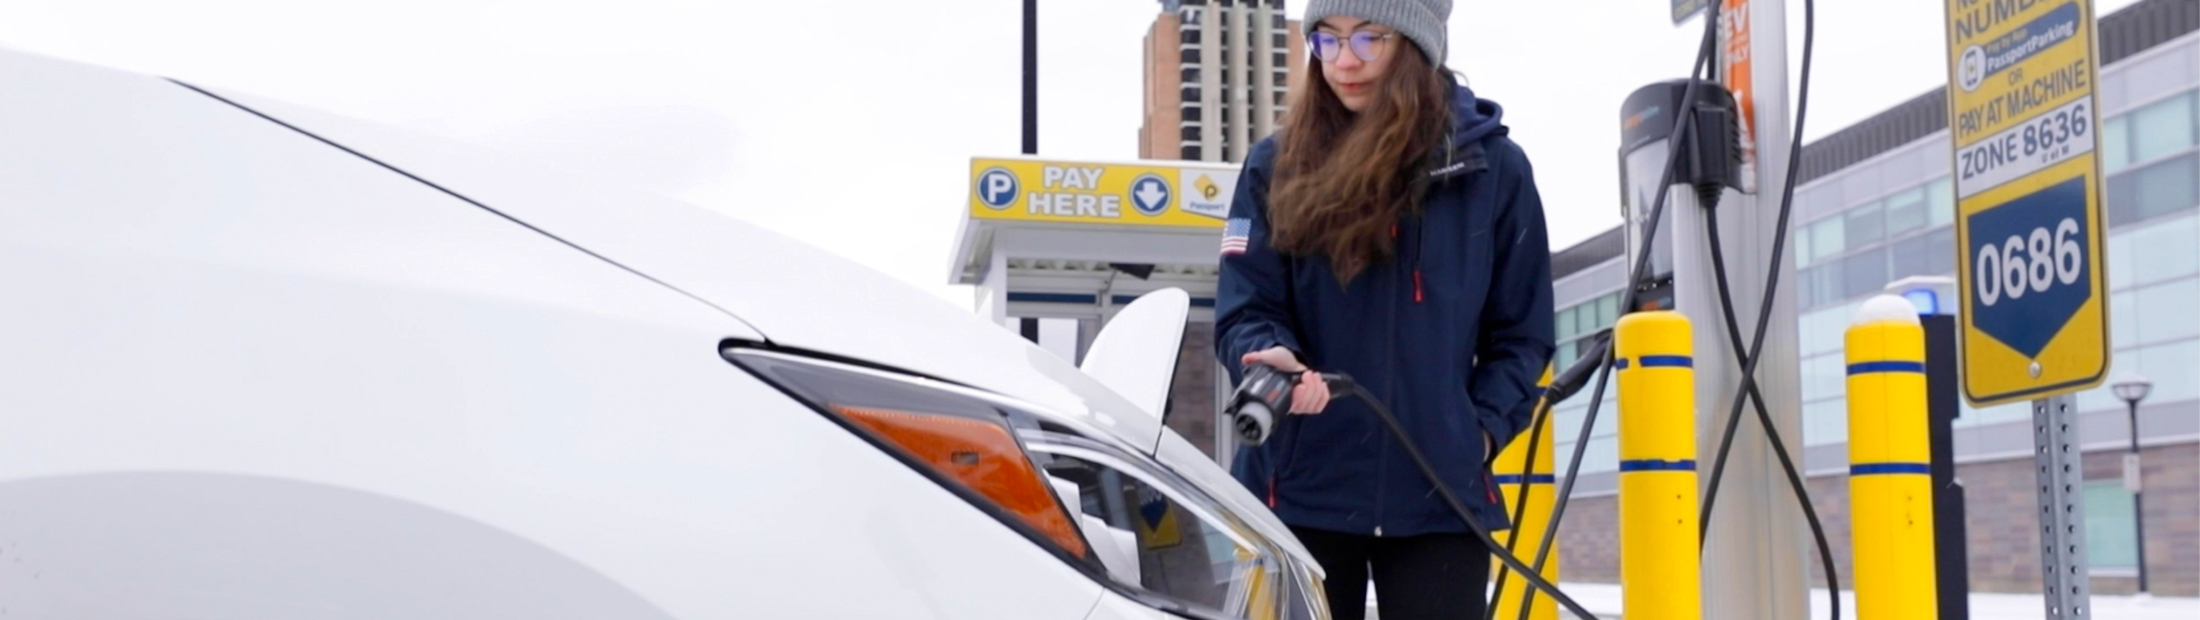 A woman preparing to plug in an electric vehicle. She's wearing a winter coat and hat. In the background, you can see Lurie Tower.